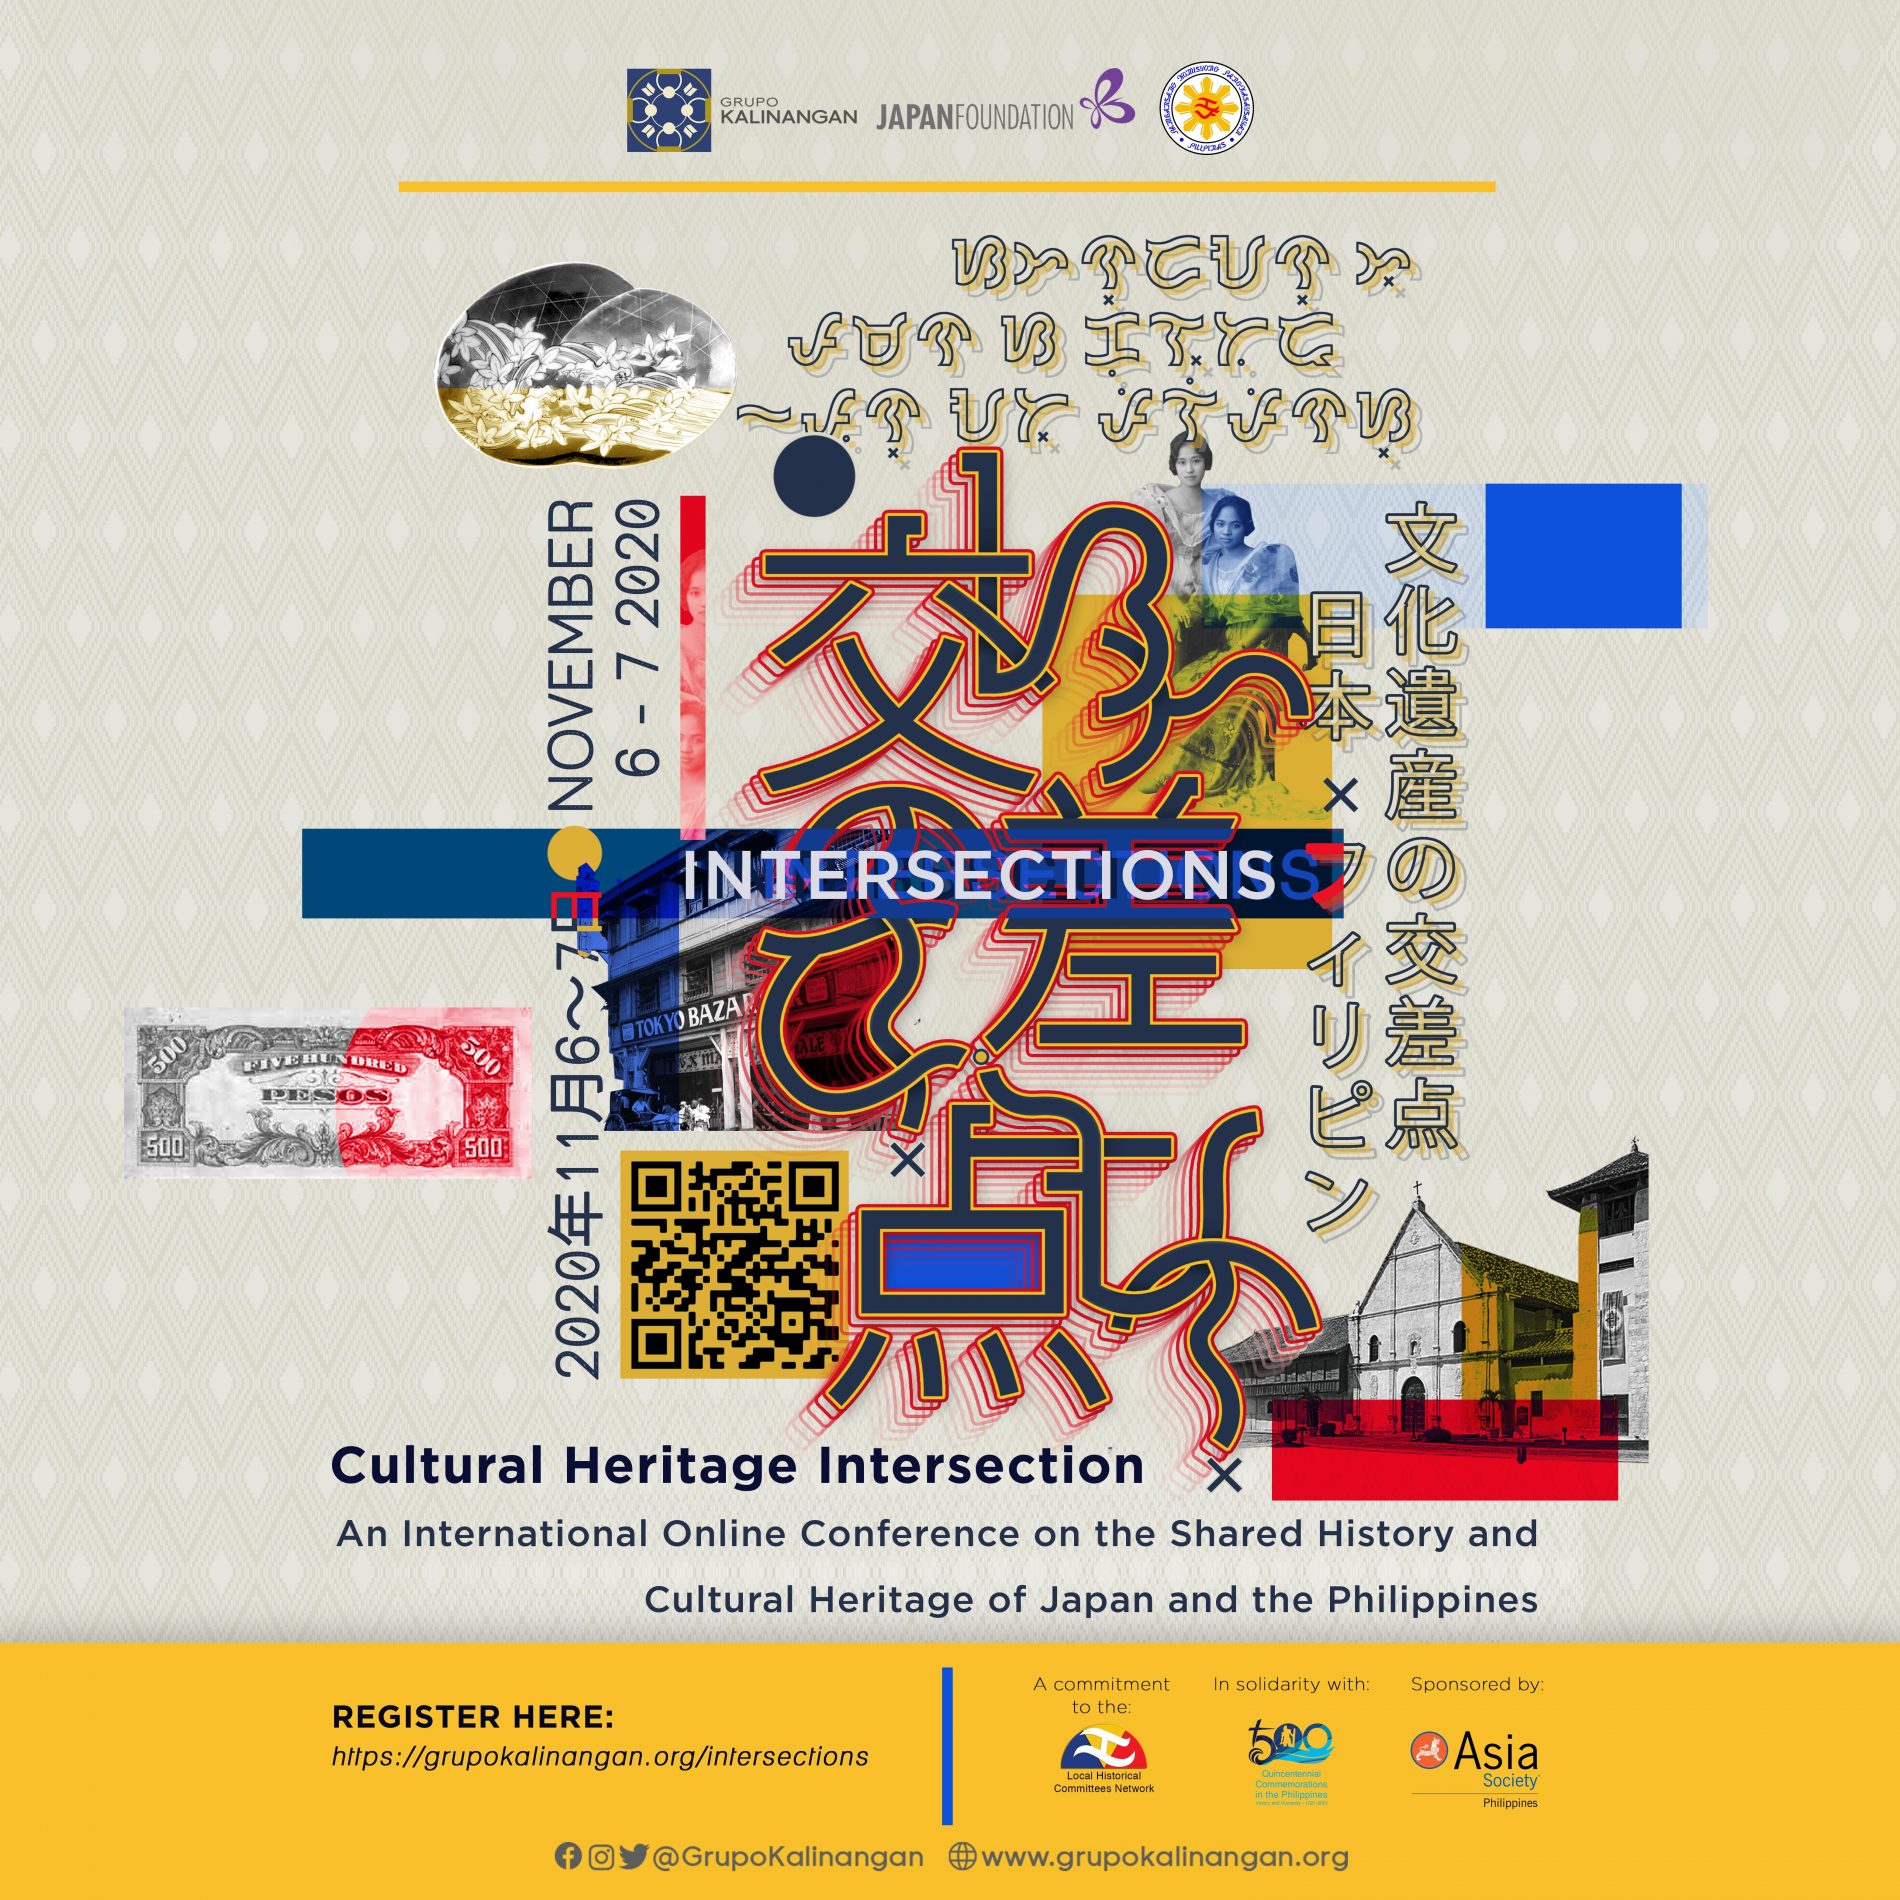 Cultural Heritage Intersection: International Online Conference on the Shared History and Cultural Heritage of Japan and the Philippines